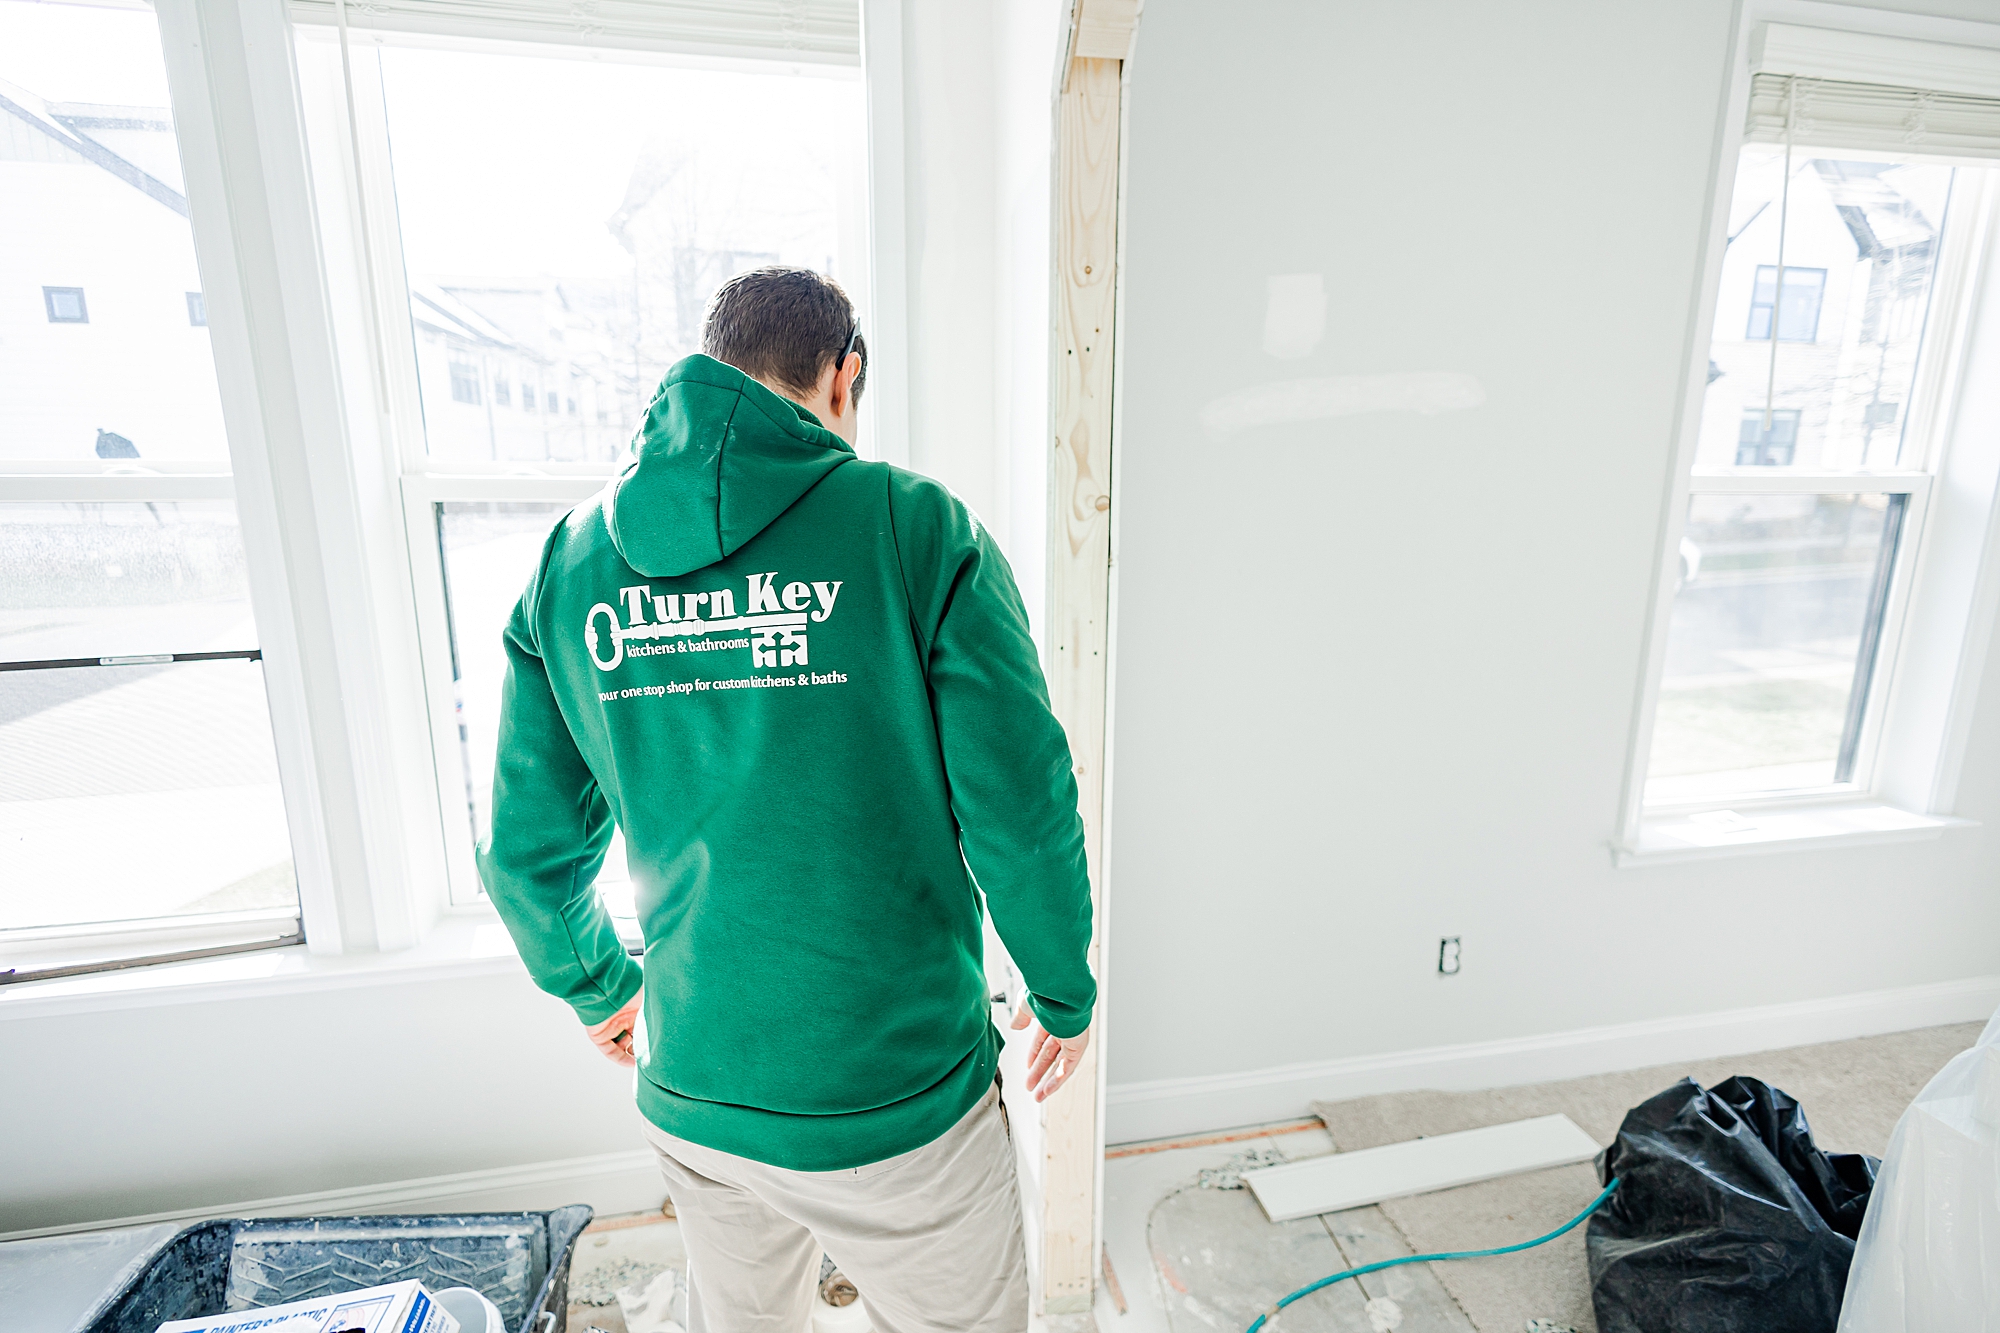 contractor in green sweatshirt looks at floor during renovations with Turn Key Solutions